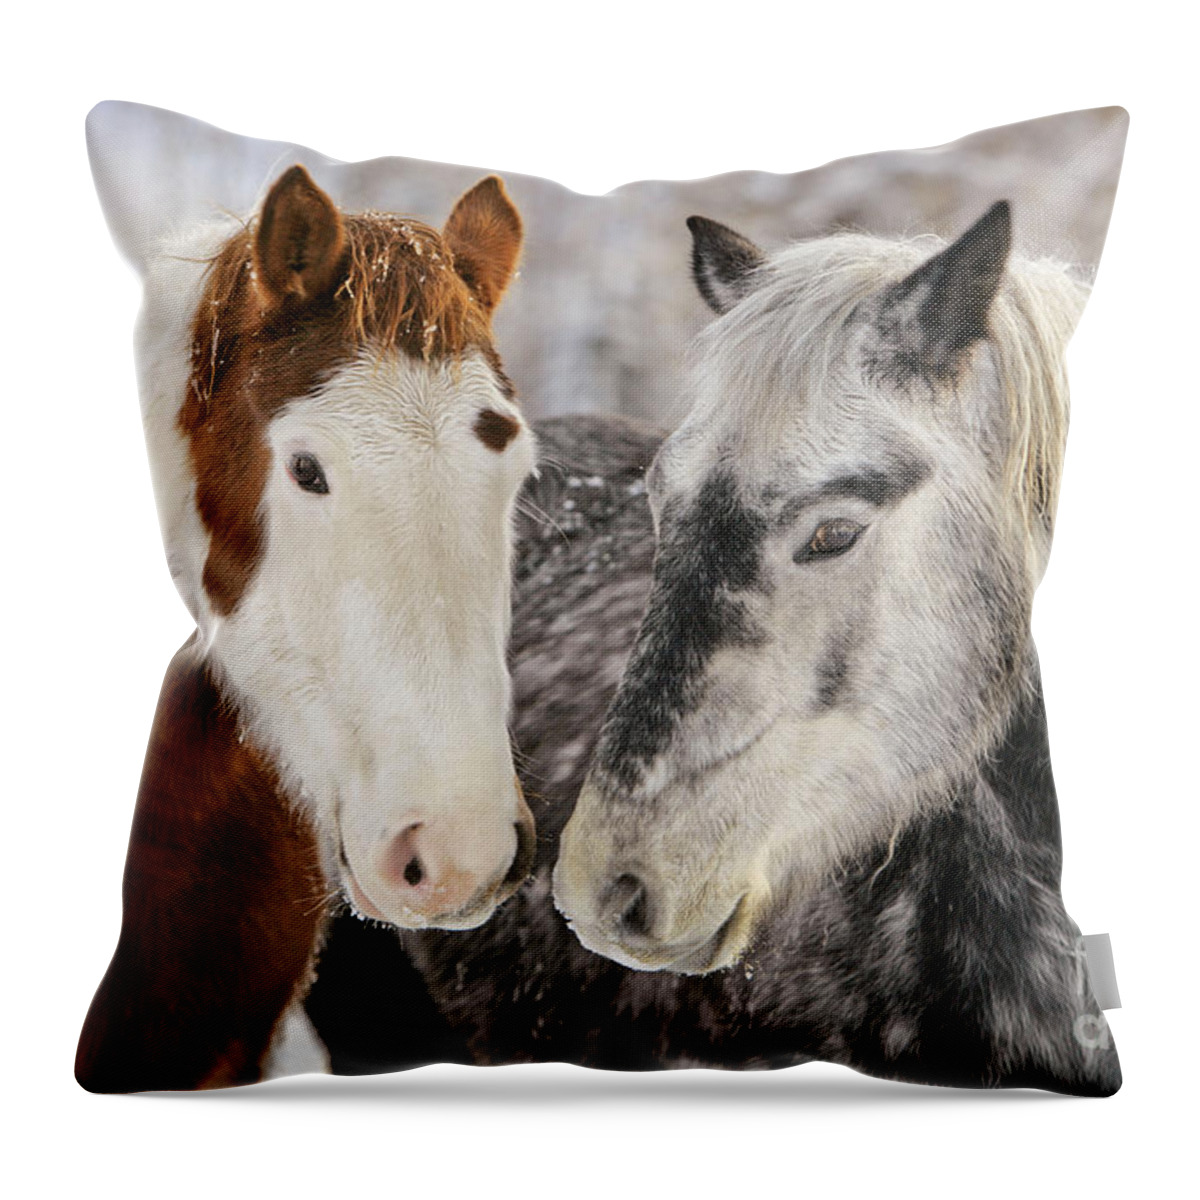 Paint Horse Throw Pillow featuring the photograph Paint And Quarterhorse Draft Horses by Rolf Kopfle